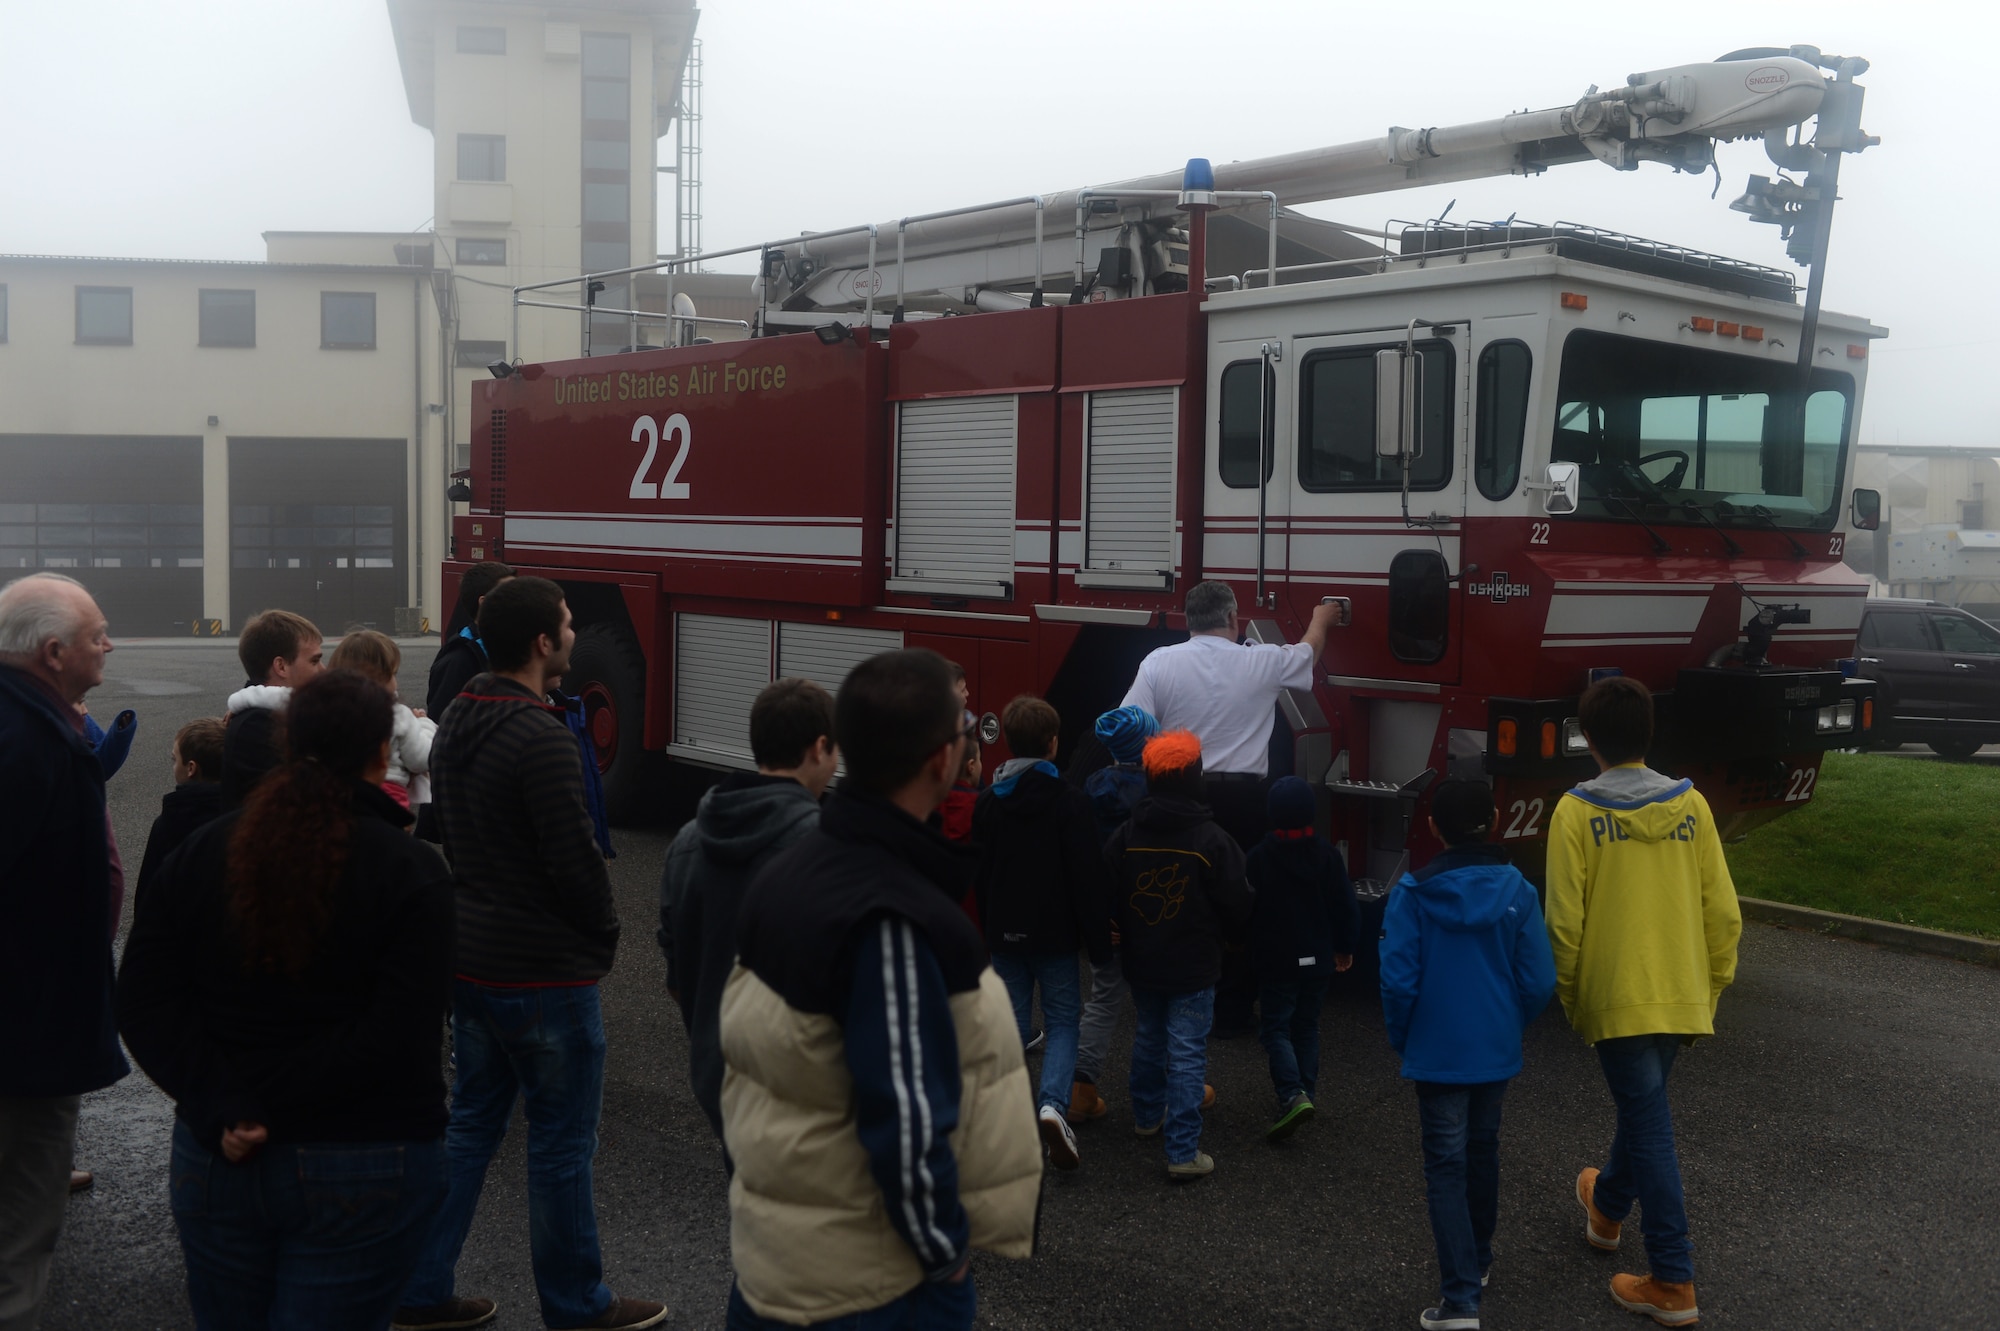 Junior firefighters from Luxembourg and their families tour a fire truck at the 52nd Civil Enginner Squadron fire station on Spangdahlem Air Base, Germany, Oct. 27, 2014. The Spangdahlem fire department hosts tours year-round and facilitates approximately one tour per week during the summer months. (U.S. Air Force photo by Senior Airman Gustavo Castillo/Released)